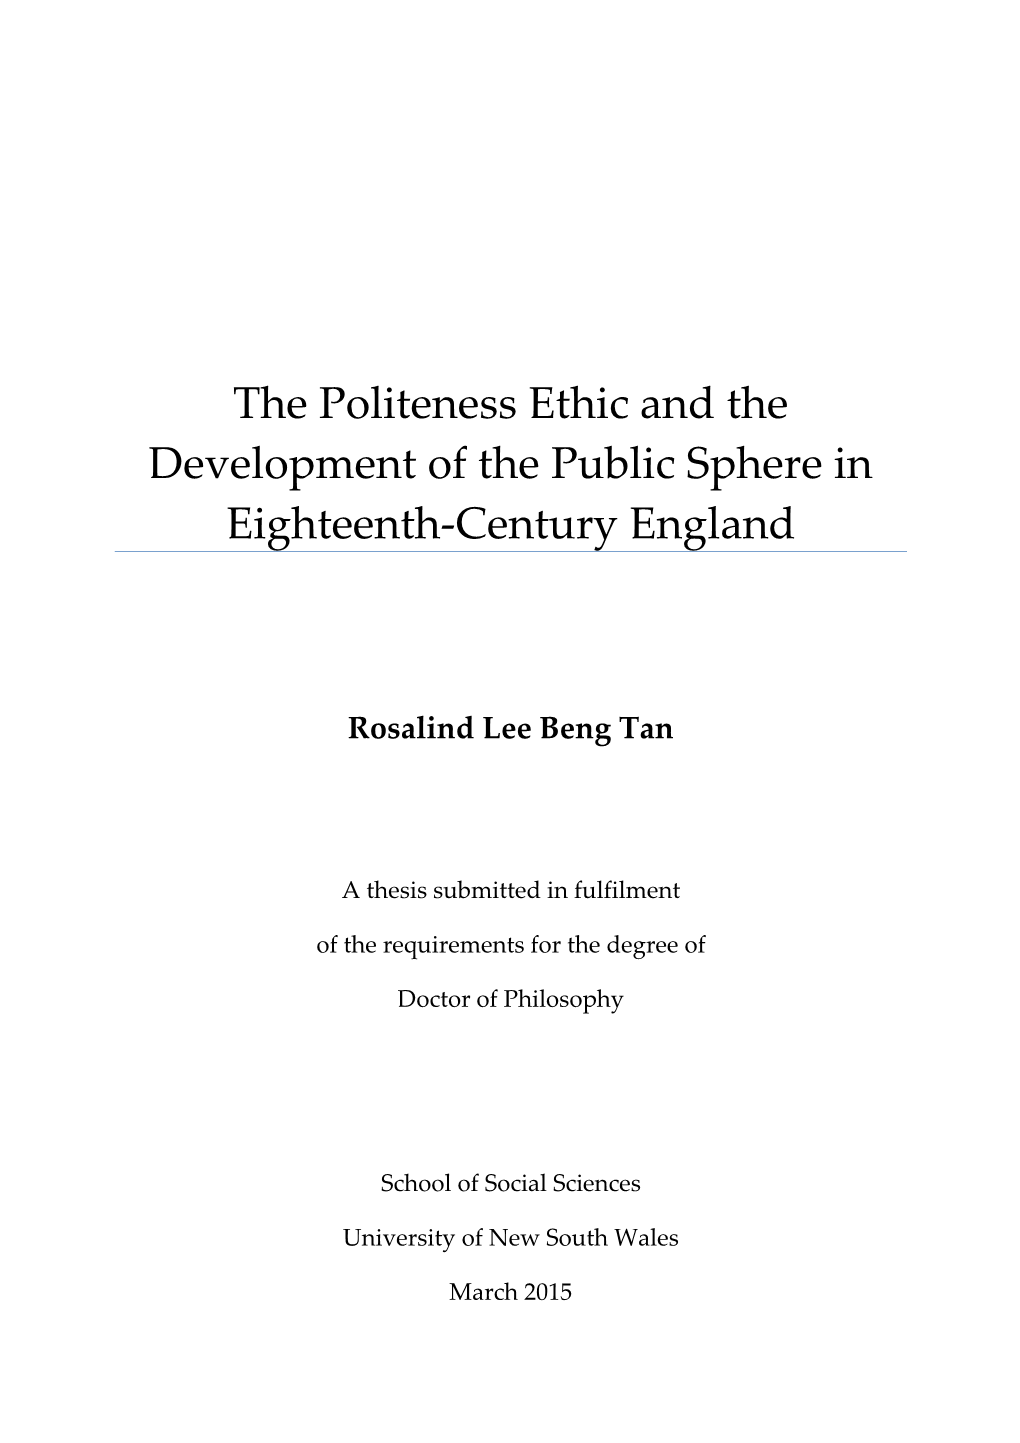 The Politeness Ethic and the Development of the Public Sphere in Eighteenth-Century England